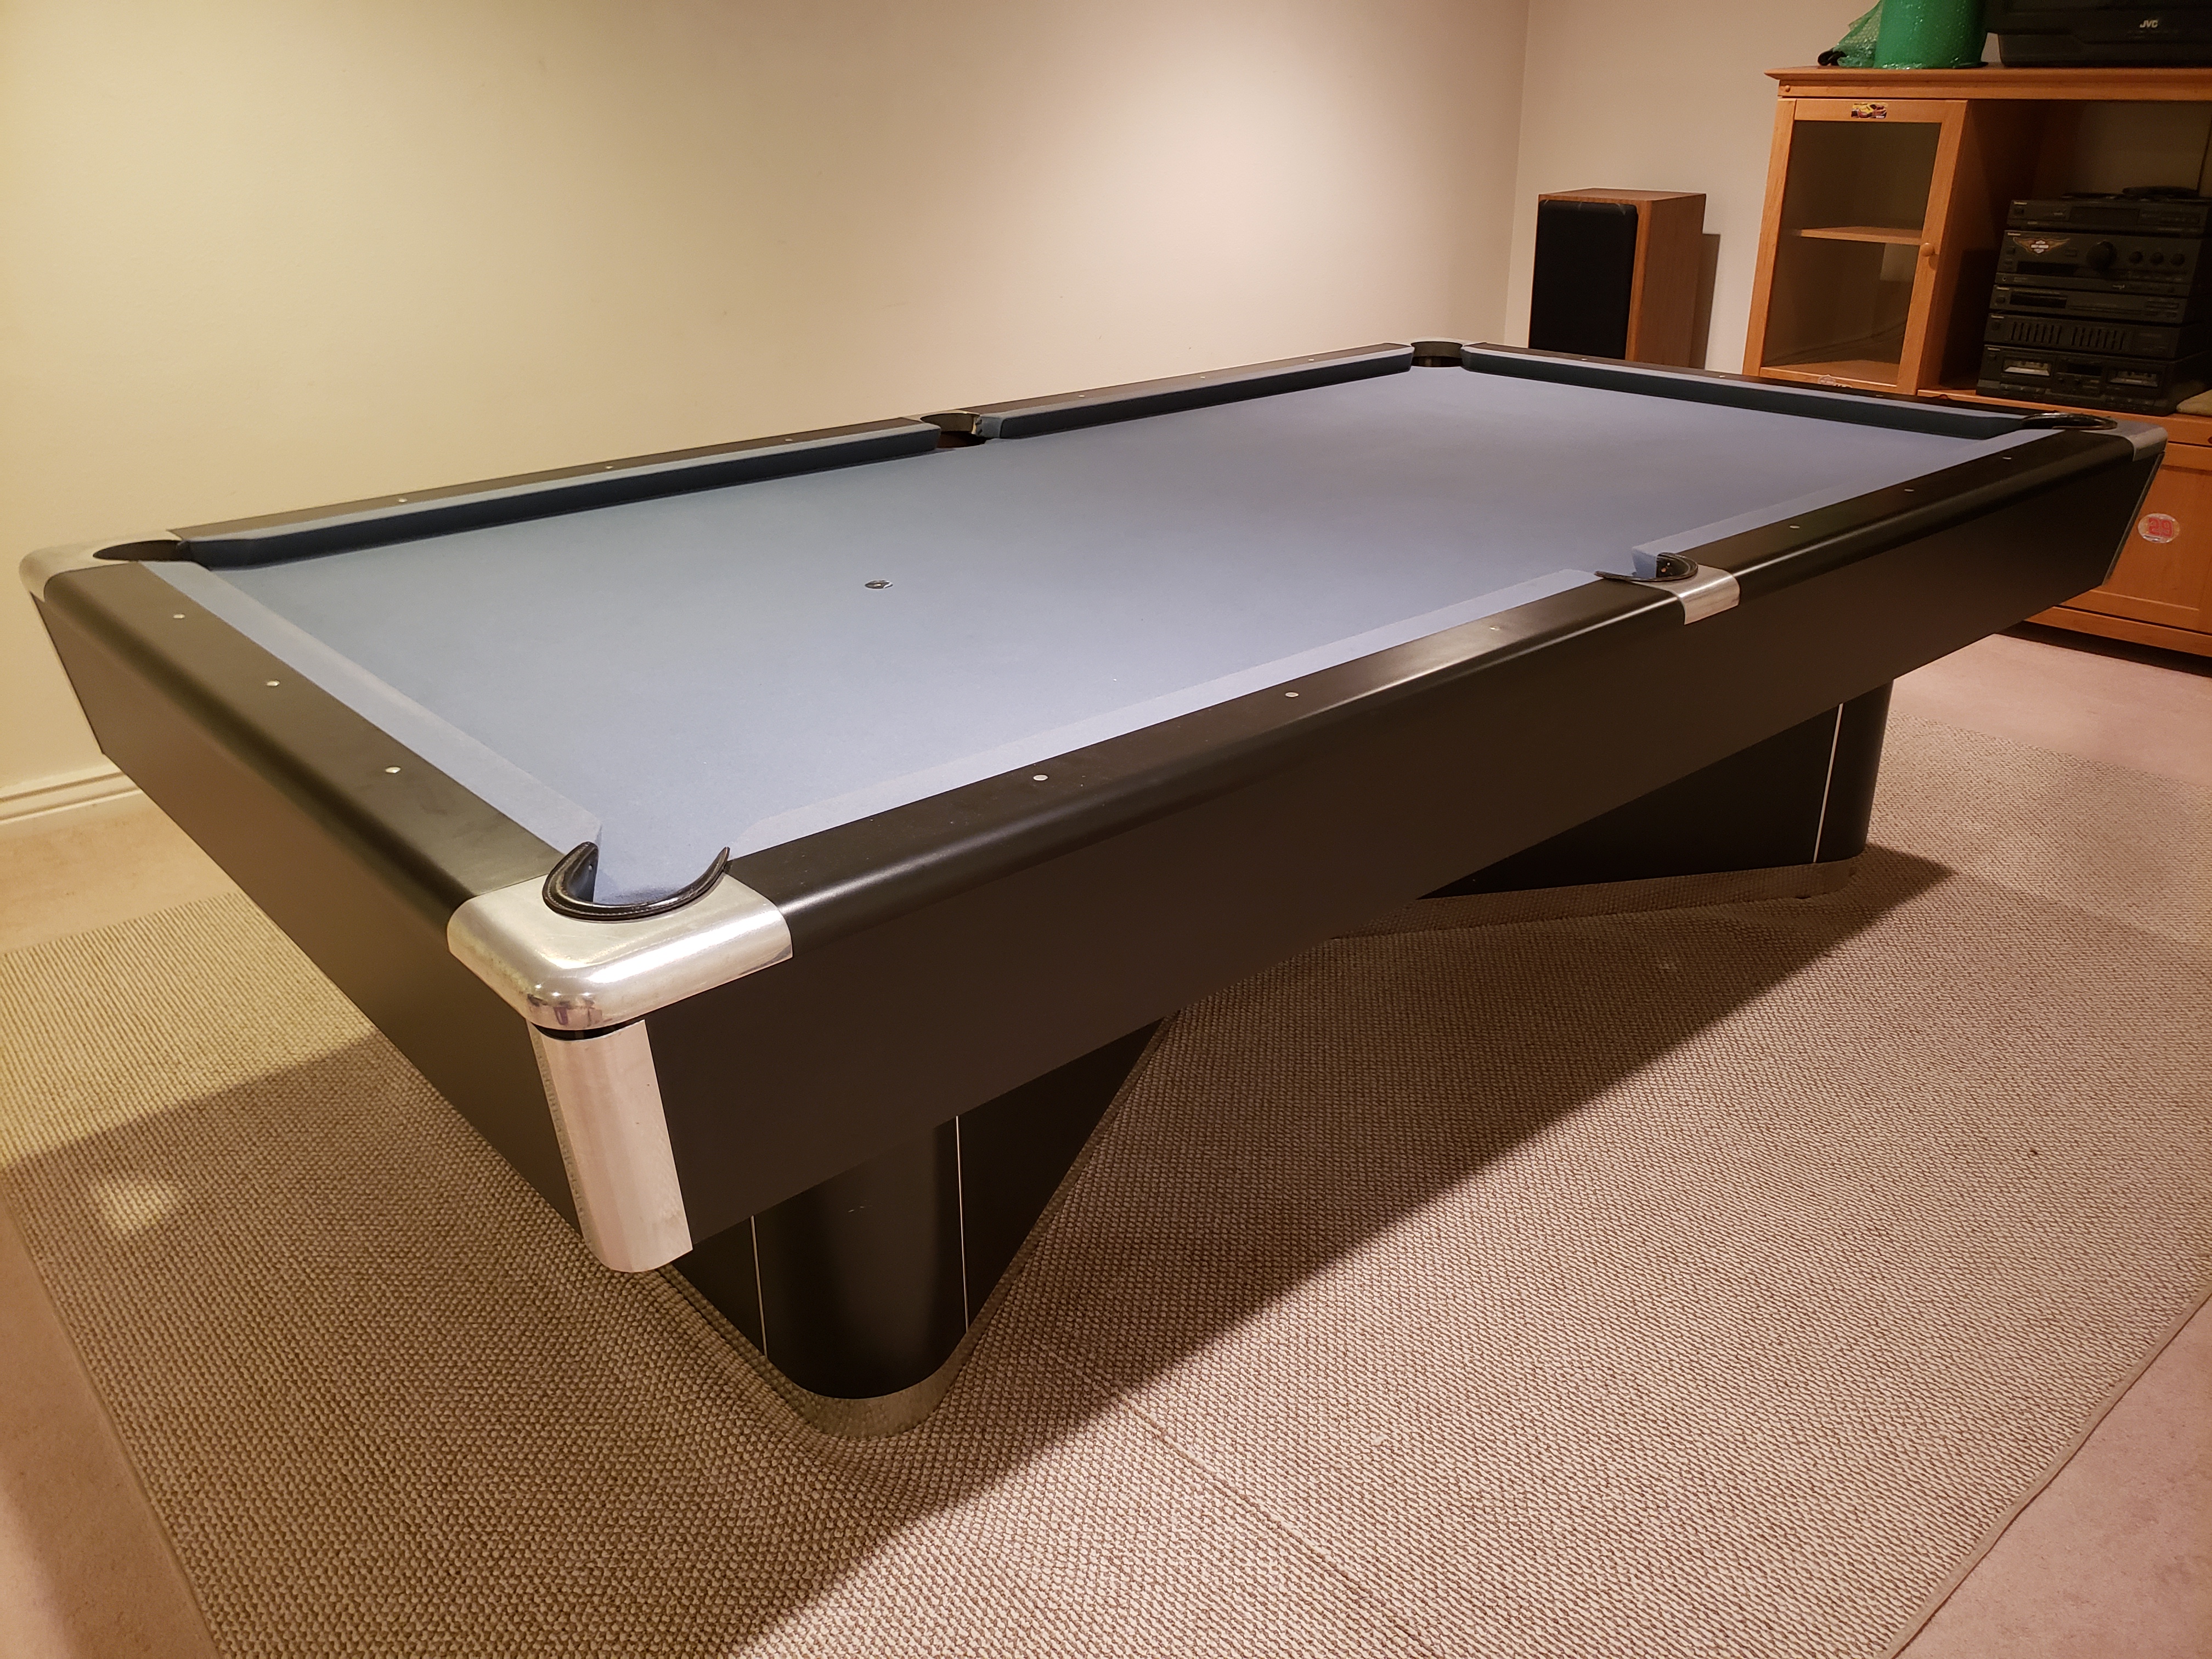 Used pool table for sale Denver:  <br> 9' Kasson 'Aurora' Professional Series.  Excellent condition.  Includes new cushion rubber and cloth.  MADE IN USA!!